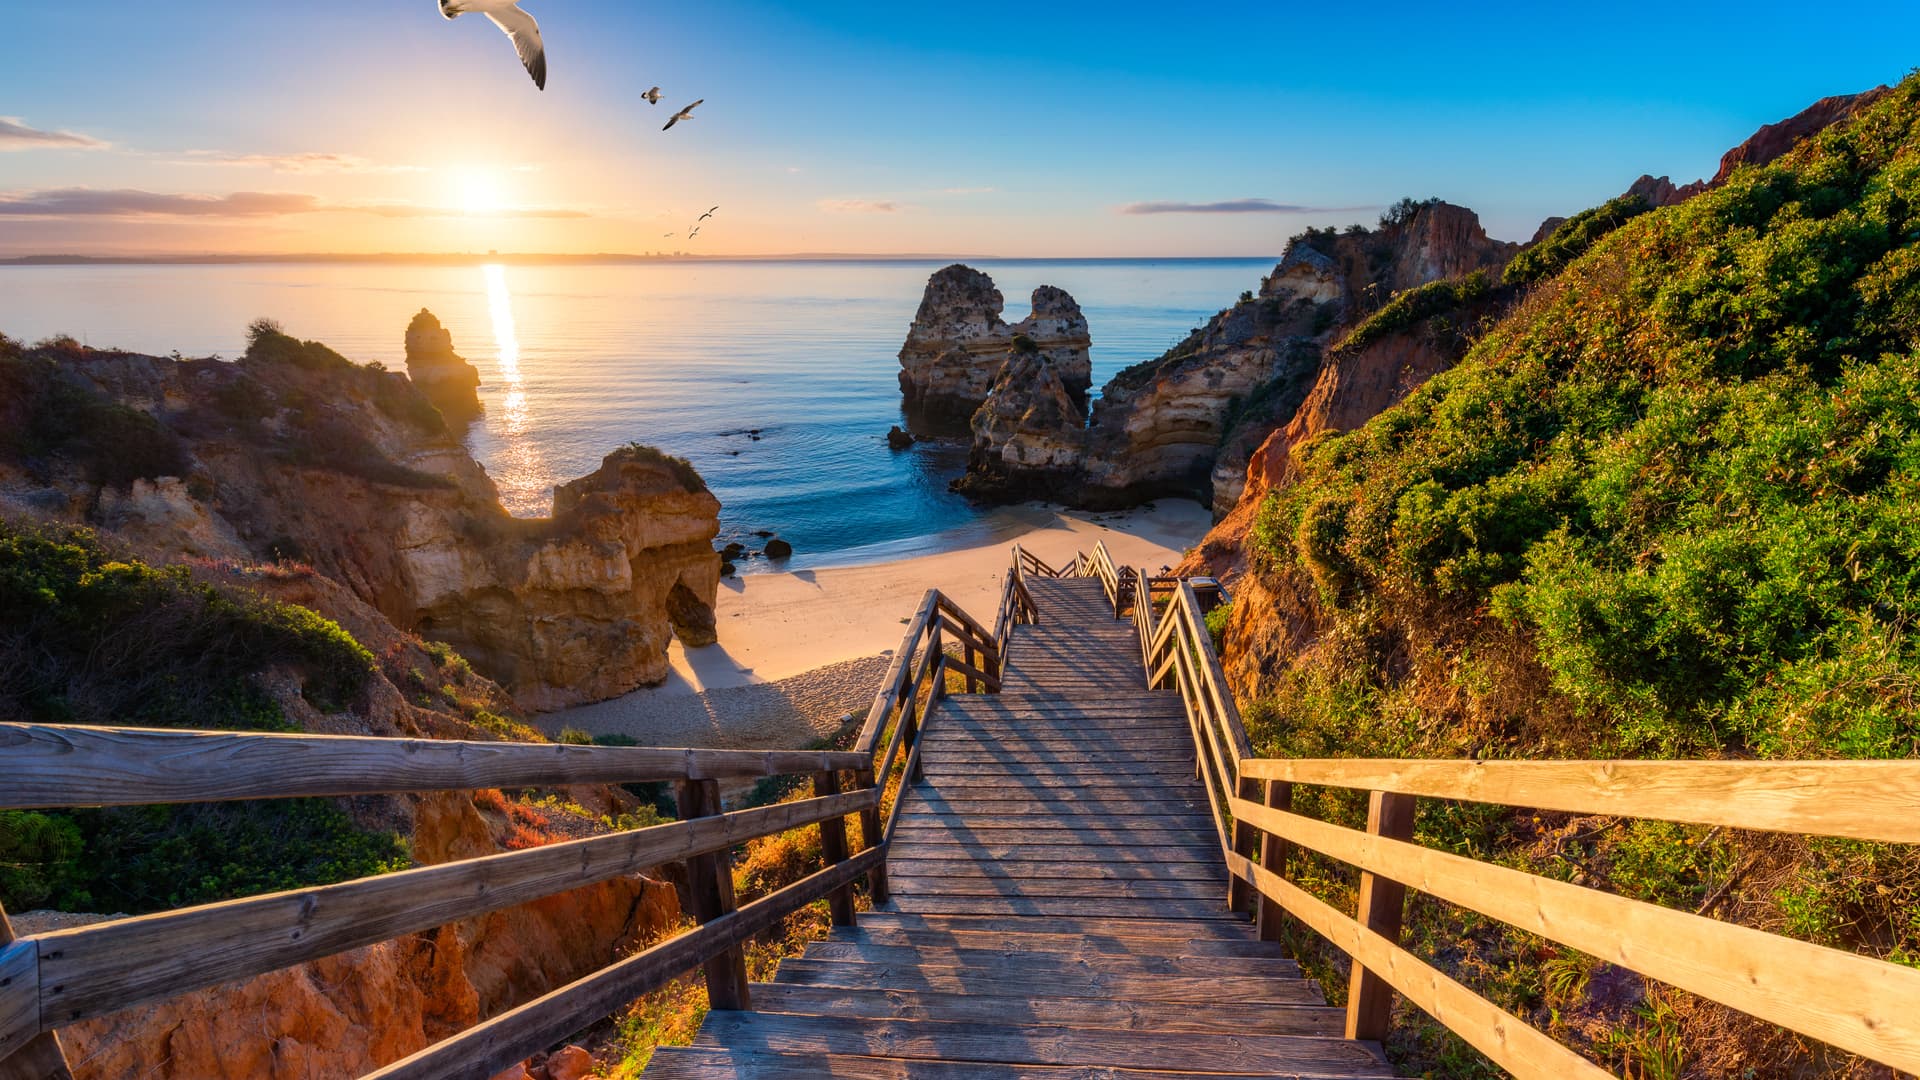 Wellness Retreats, Wine Tours and Surf Holidays – Discover Portugal in 2022 image